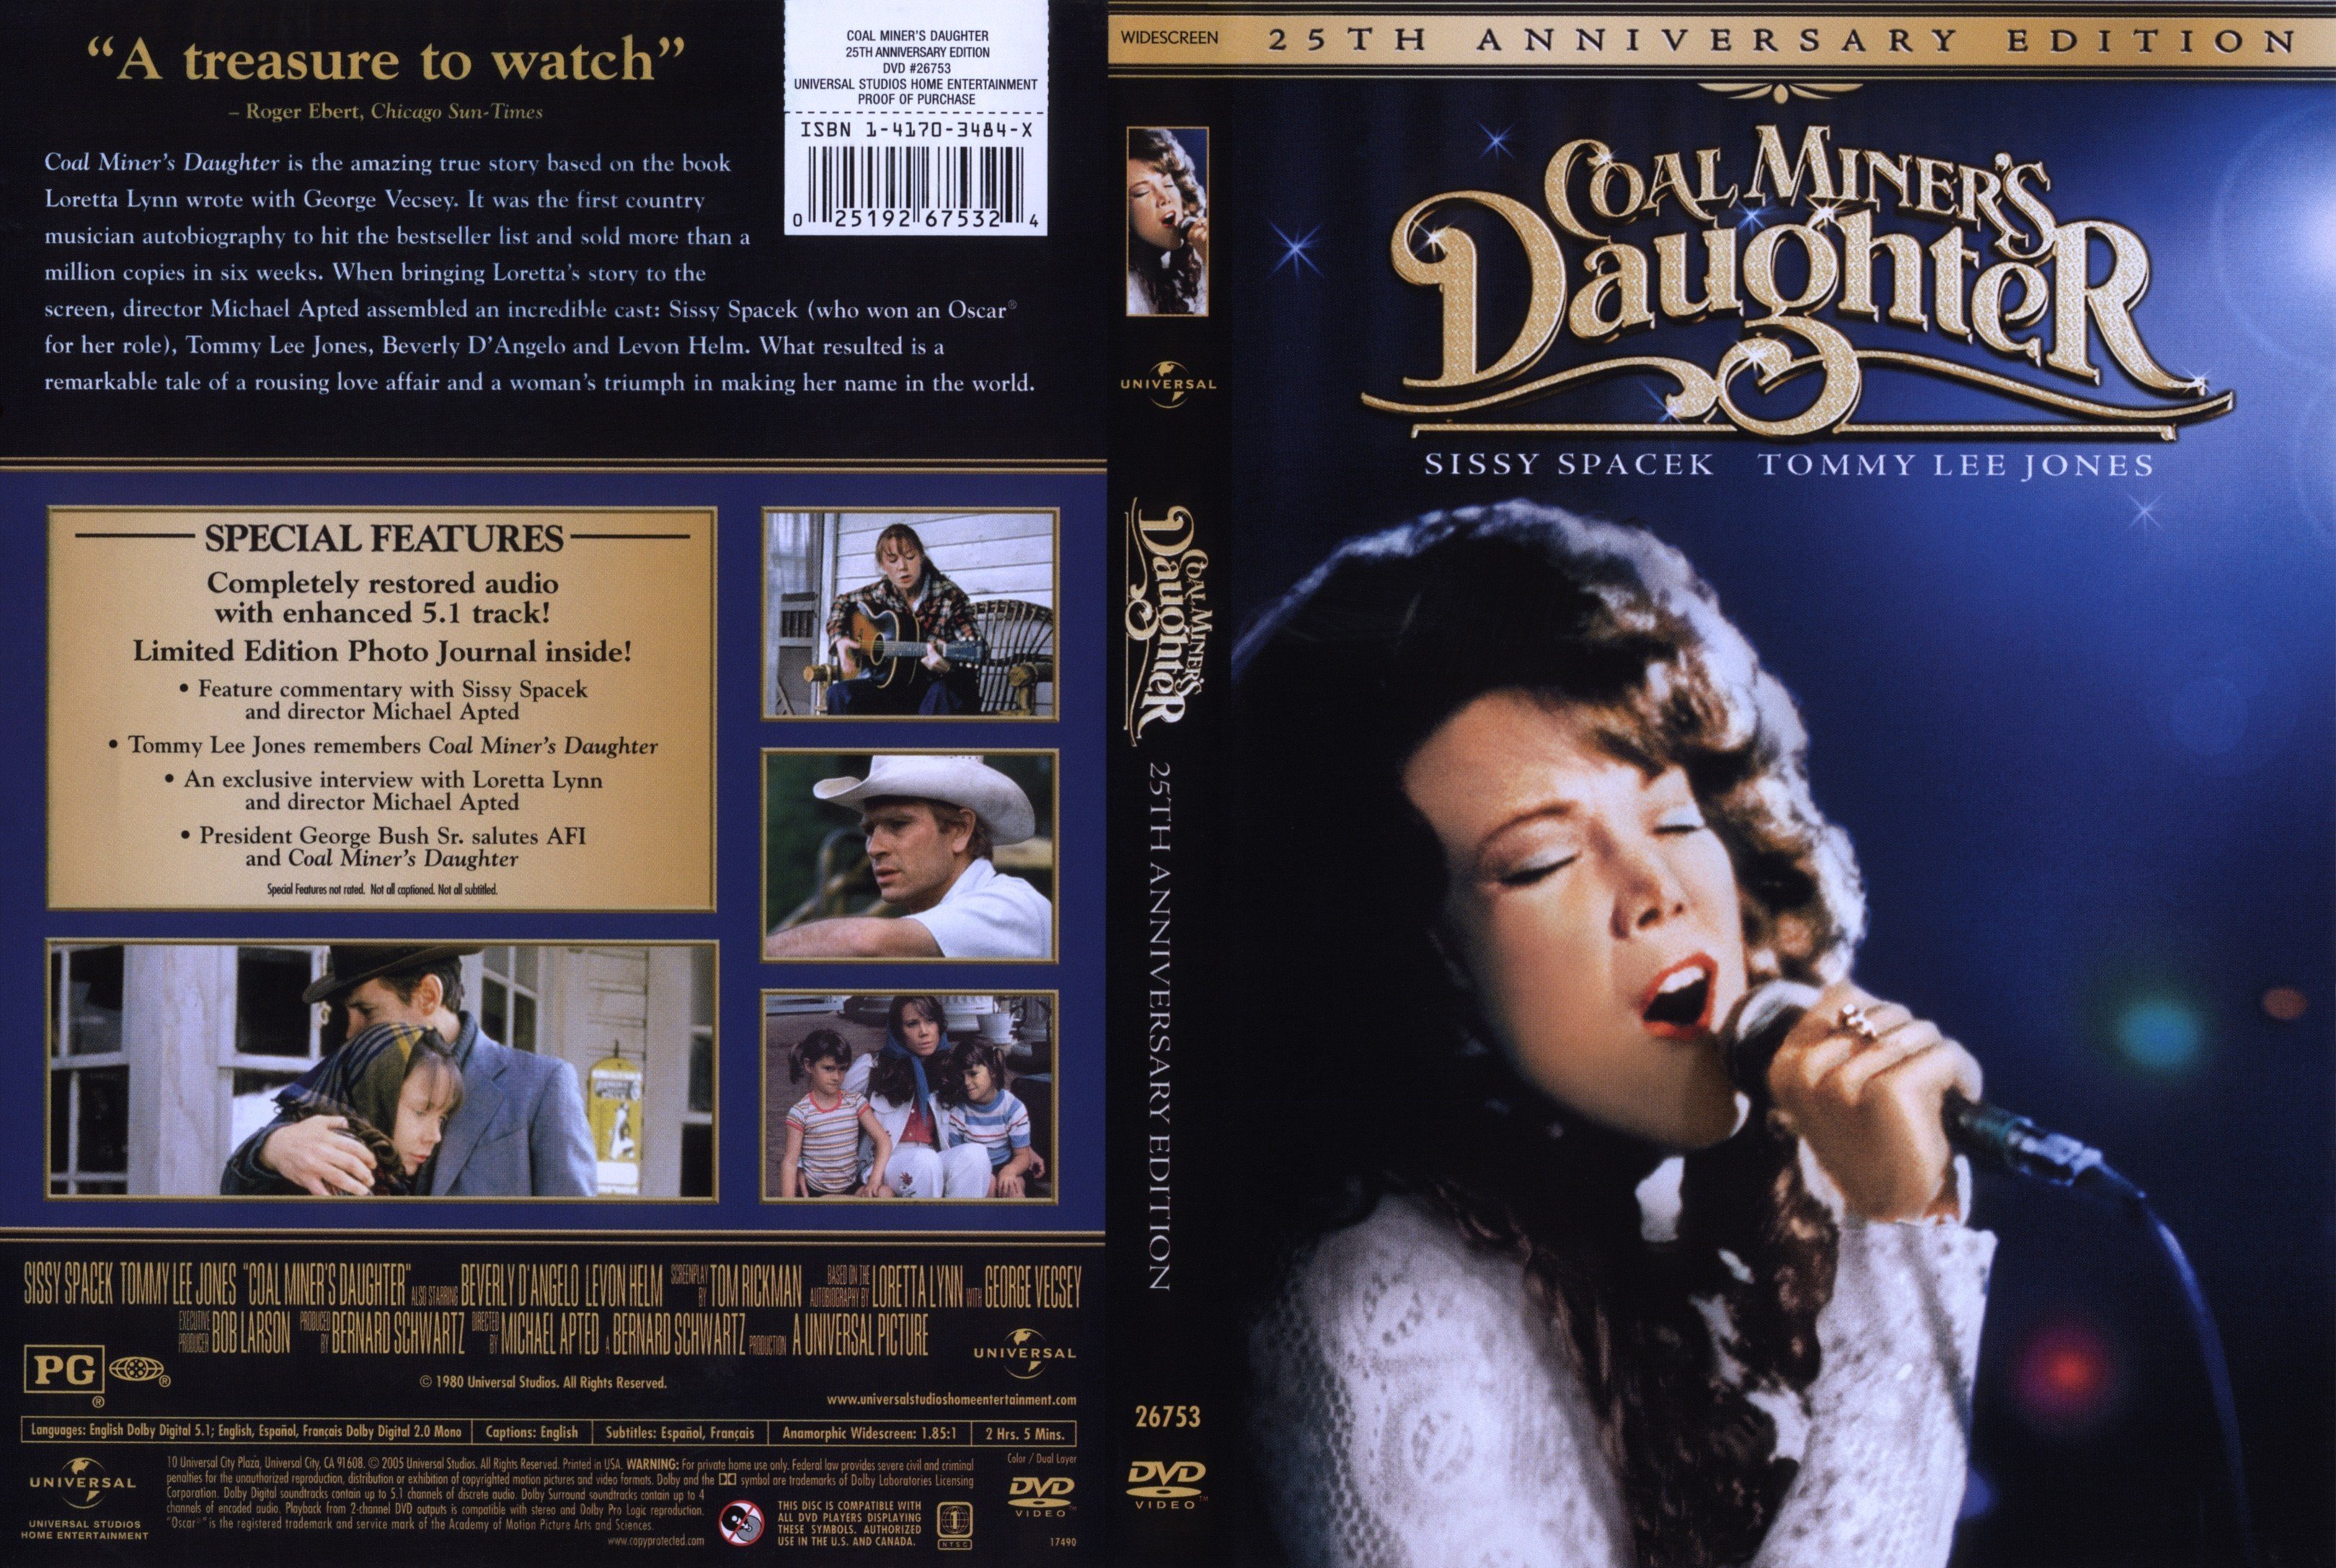 Coal Miners Daughter 25th Anniversary Edition 1980 Dvd Cover.jpg.